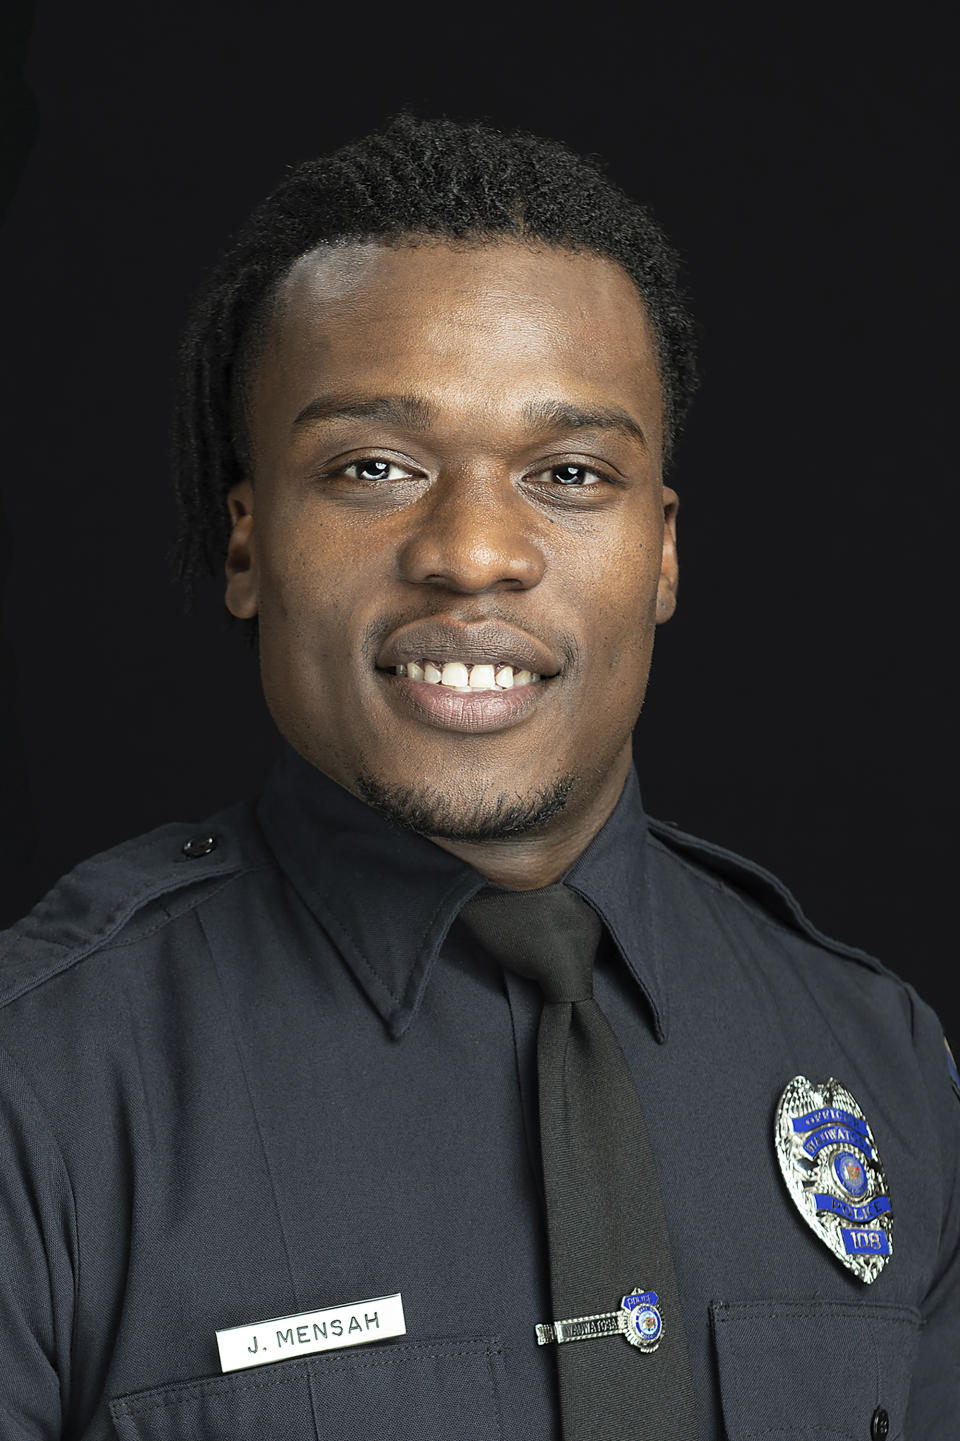 This undated photo provided by the Wauwatosa Police Department in Wauwatosa, Wis., shows Wauwatosa Police Officer Joseph Mensah. In a report released Wednesday Oct. 7, 2020, an independent investigator recommended officials in the Milwaukee suburb fire Mensah, who has shot and killed three people in the last five years. (Gary Monreal/Monreal Photography LLC/Wauwatosa Police Department via AP)